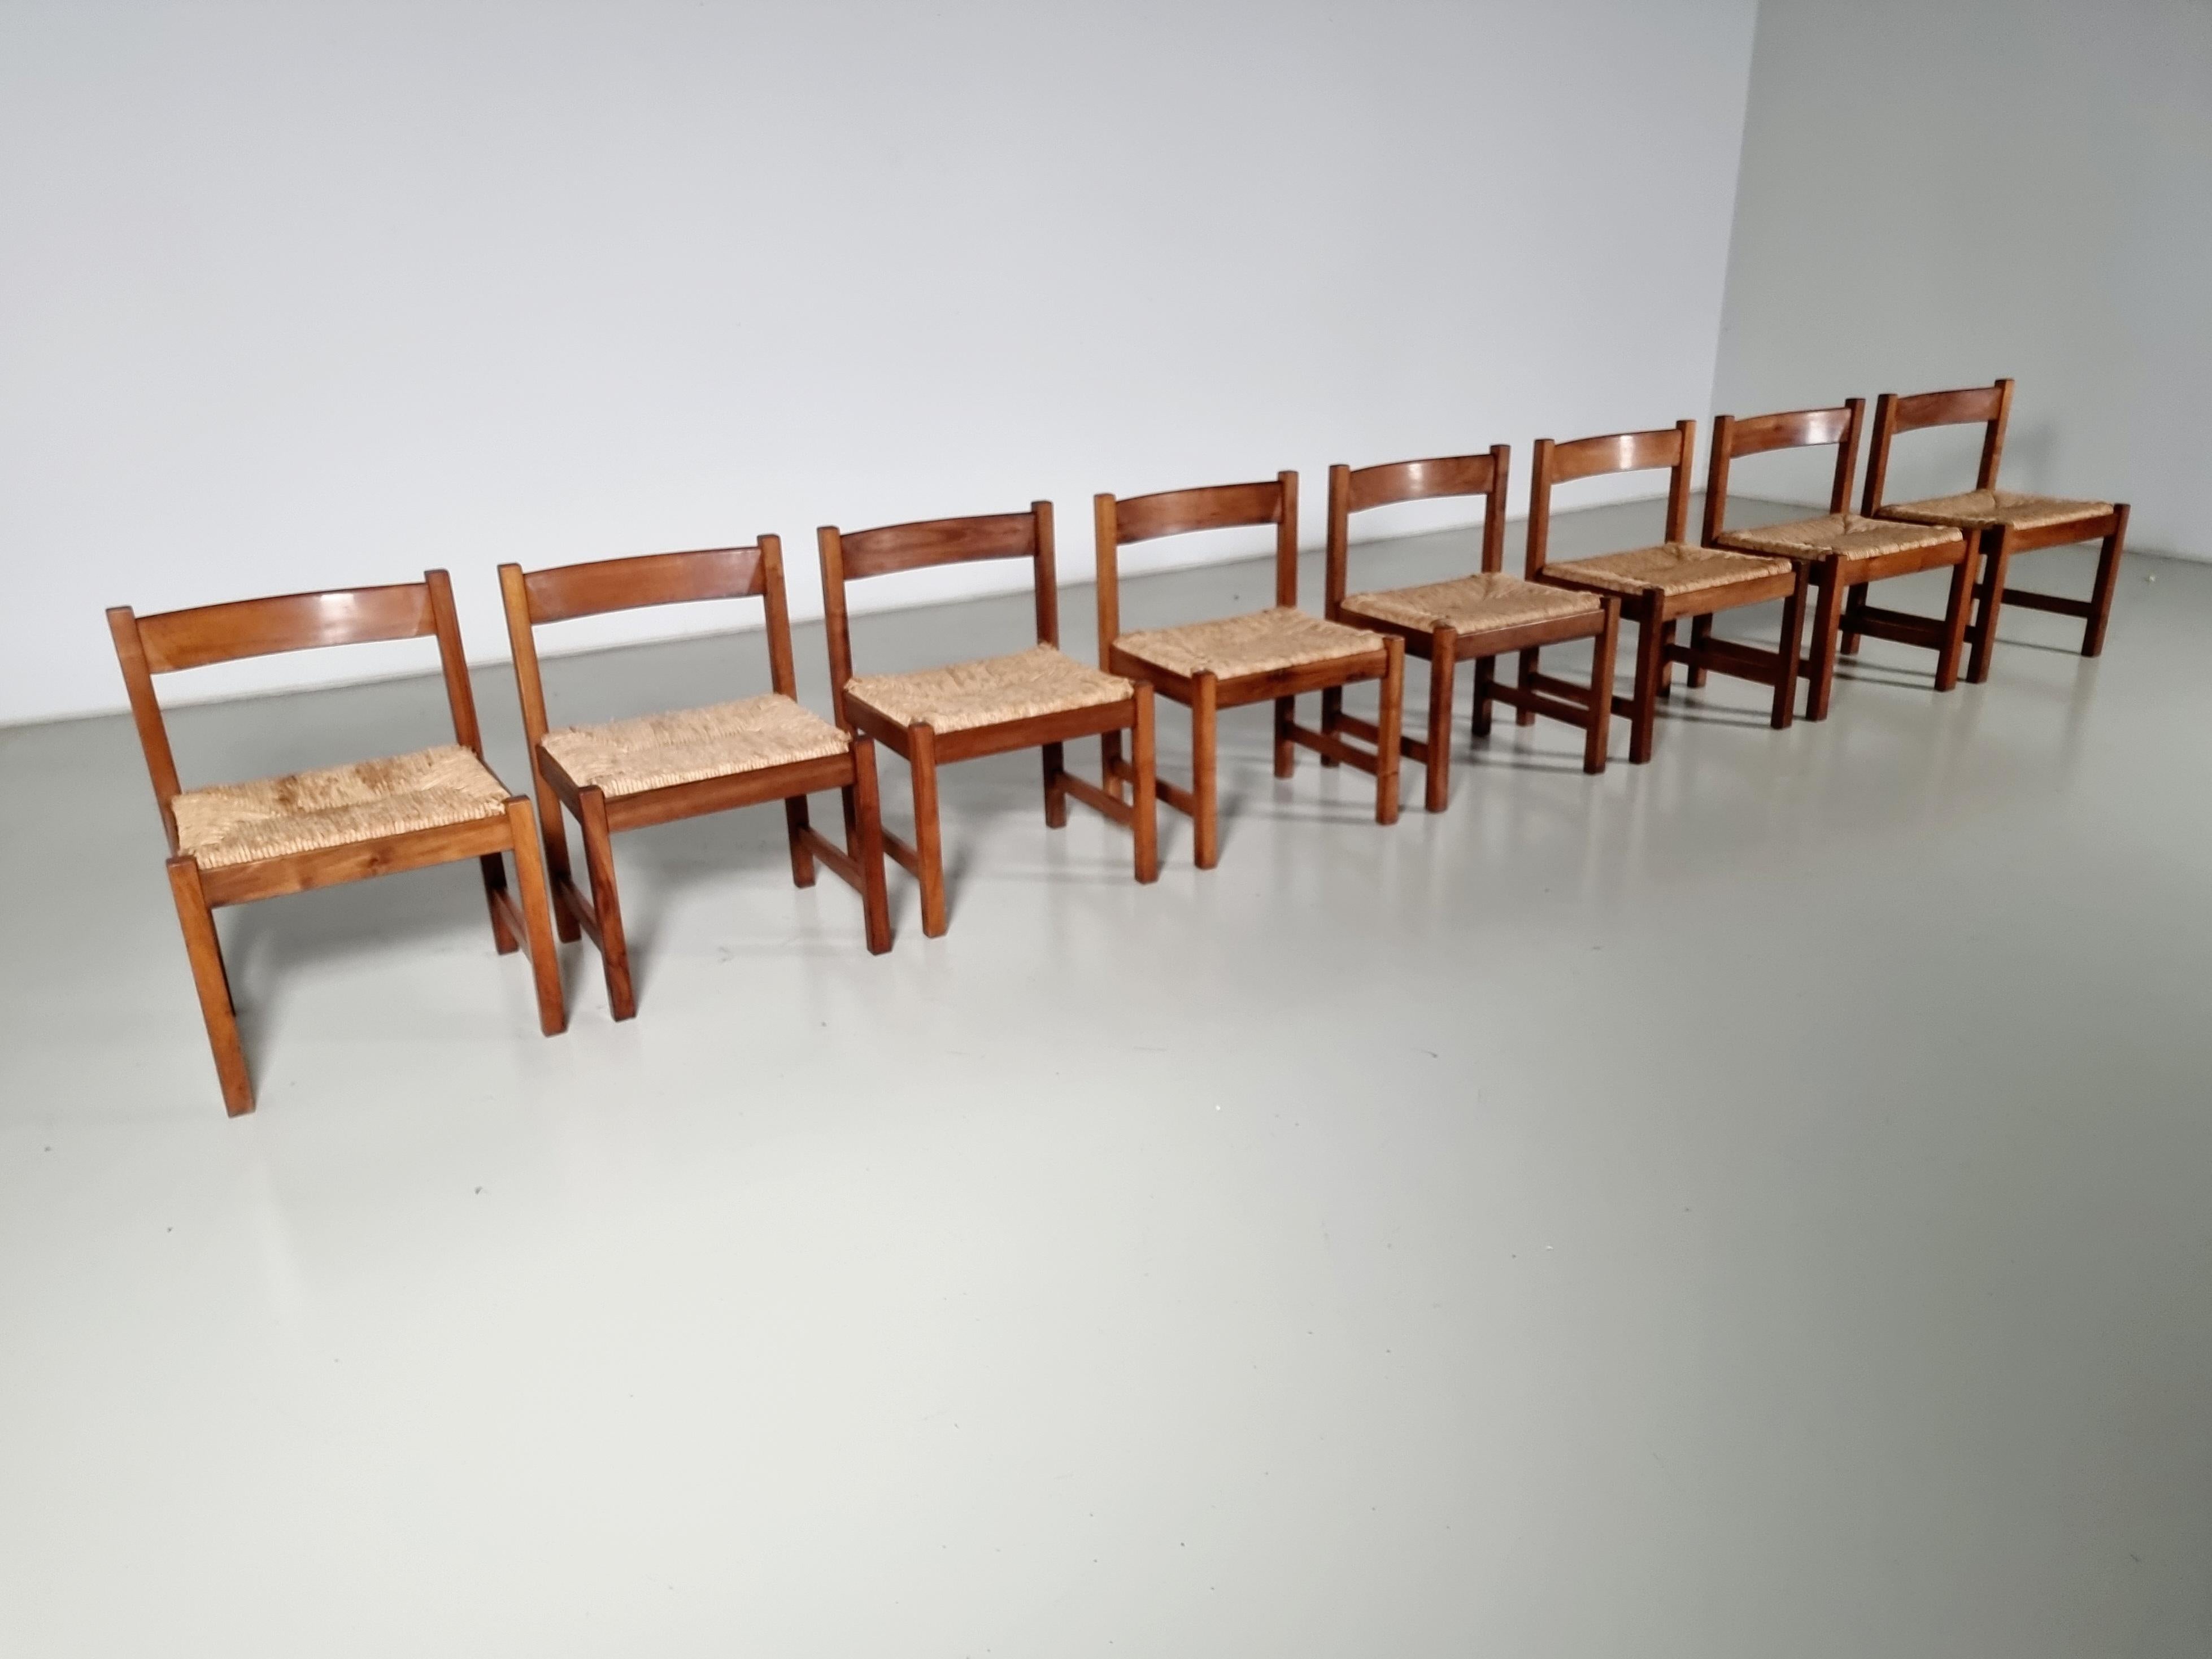 Set of 8 dining chairs from the Torbecchia series, designed by Giovanni Michelucci for Poltronova in 1964.

Solid walnut structure with seats upholstered in rush. The solid wood chairs have gained a stunning patina through the years. The woven rush